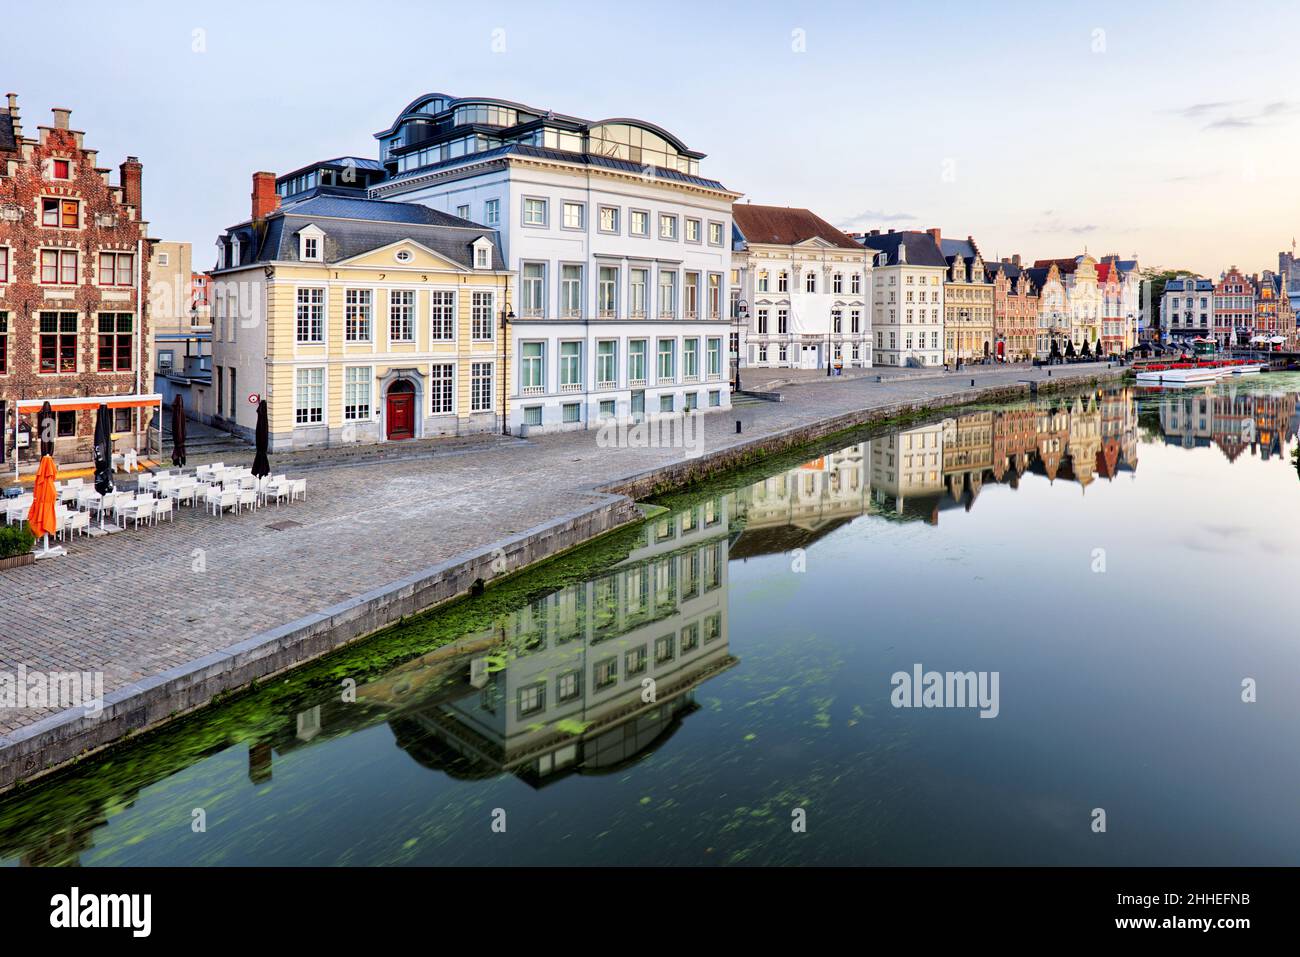 Belgium, Ghent - canal and medieval buildings in popular touristic city Stock Photo